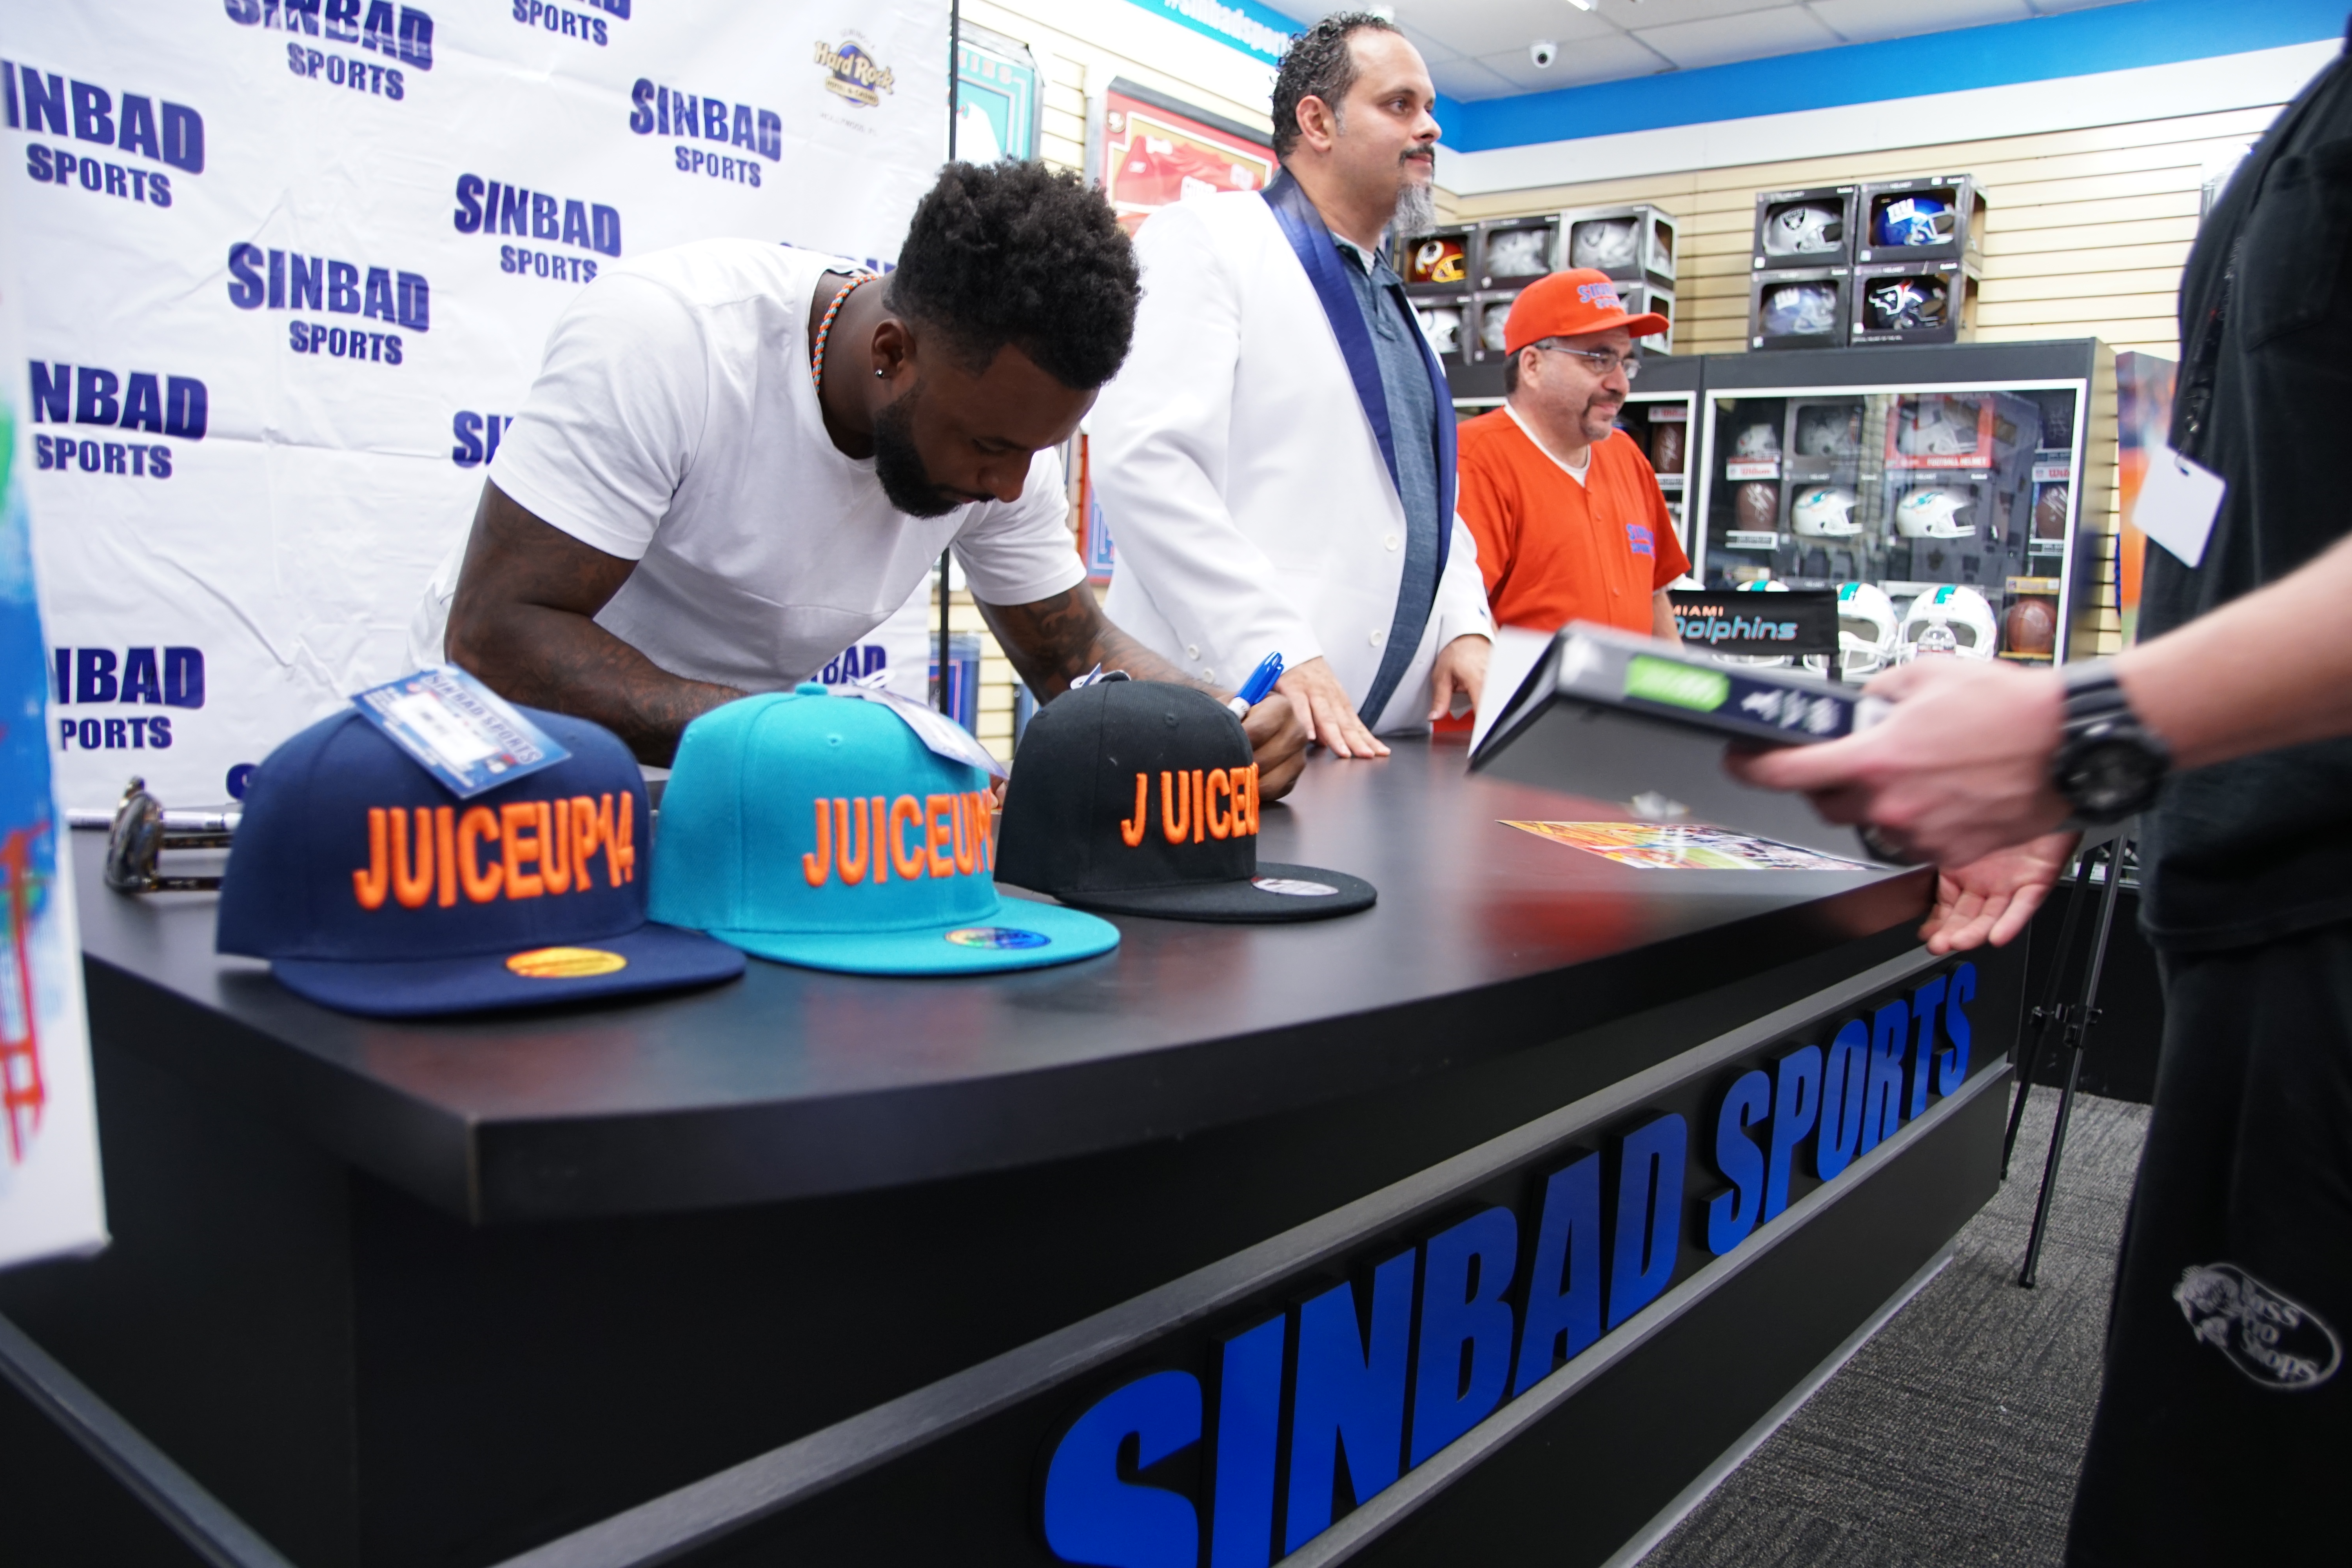 jarvis landry signing/autograph on jersey #14 caps apparels at sinbad sports